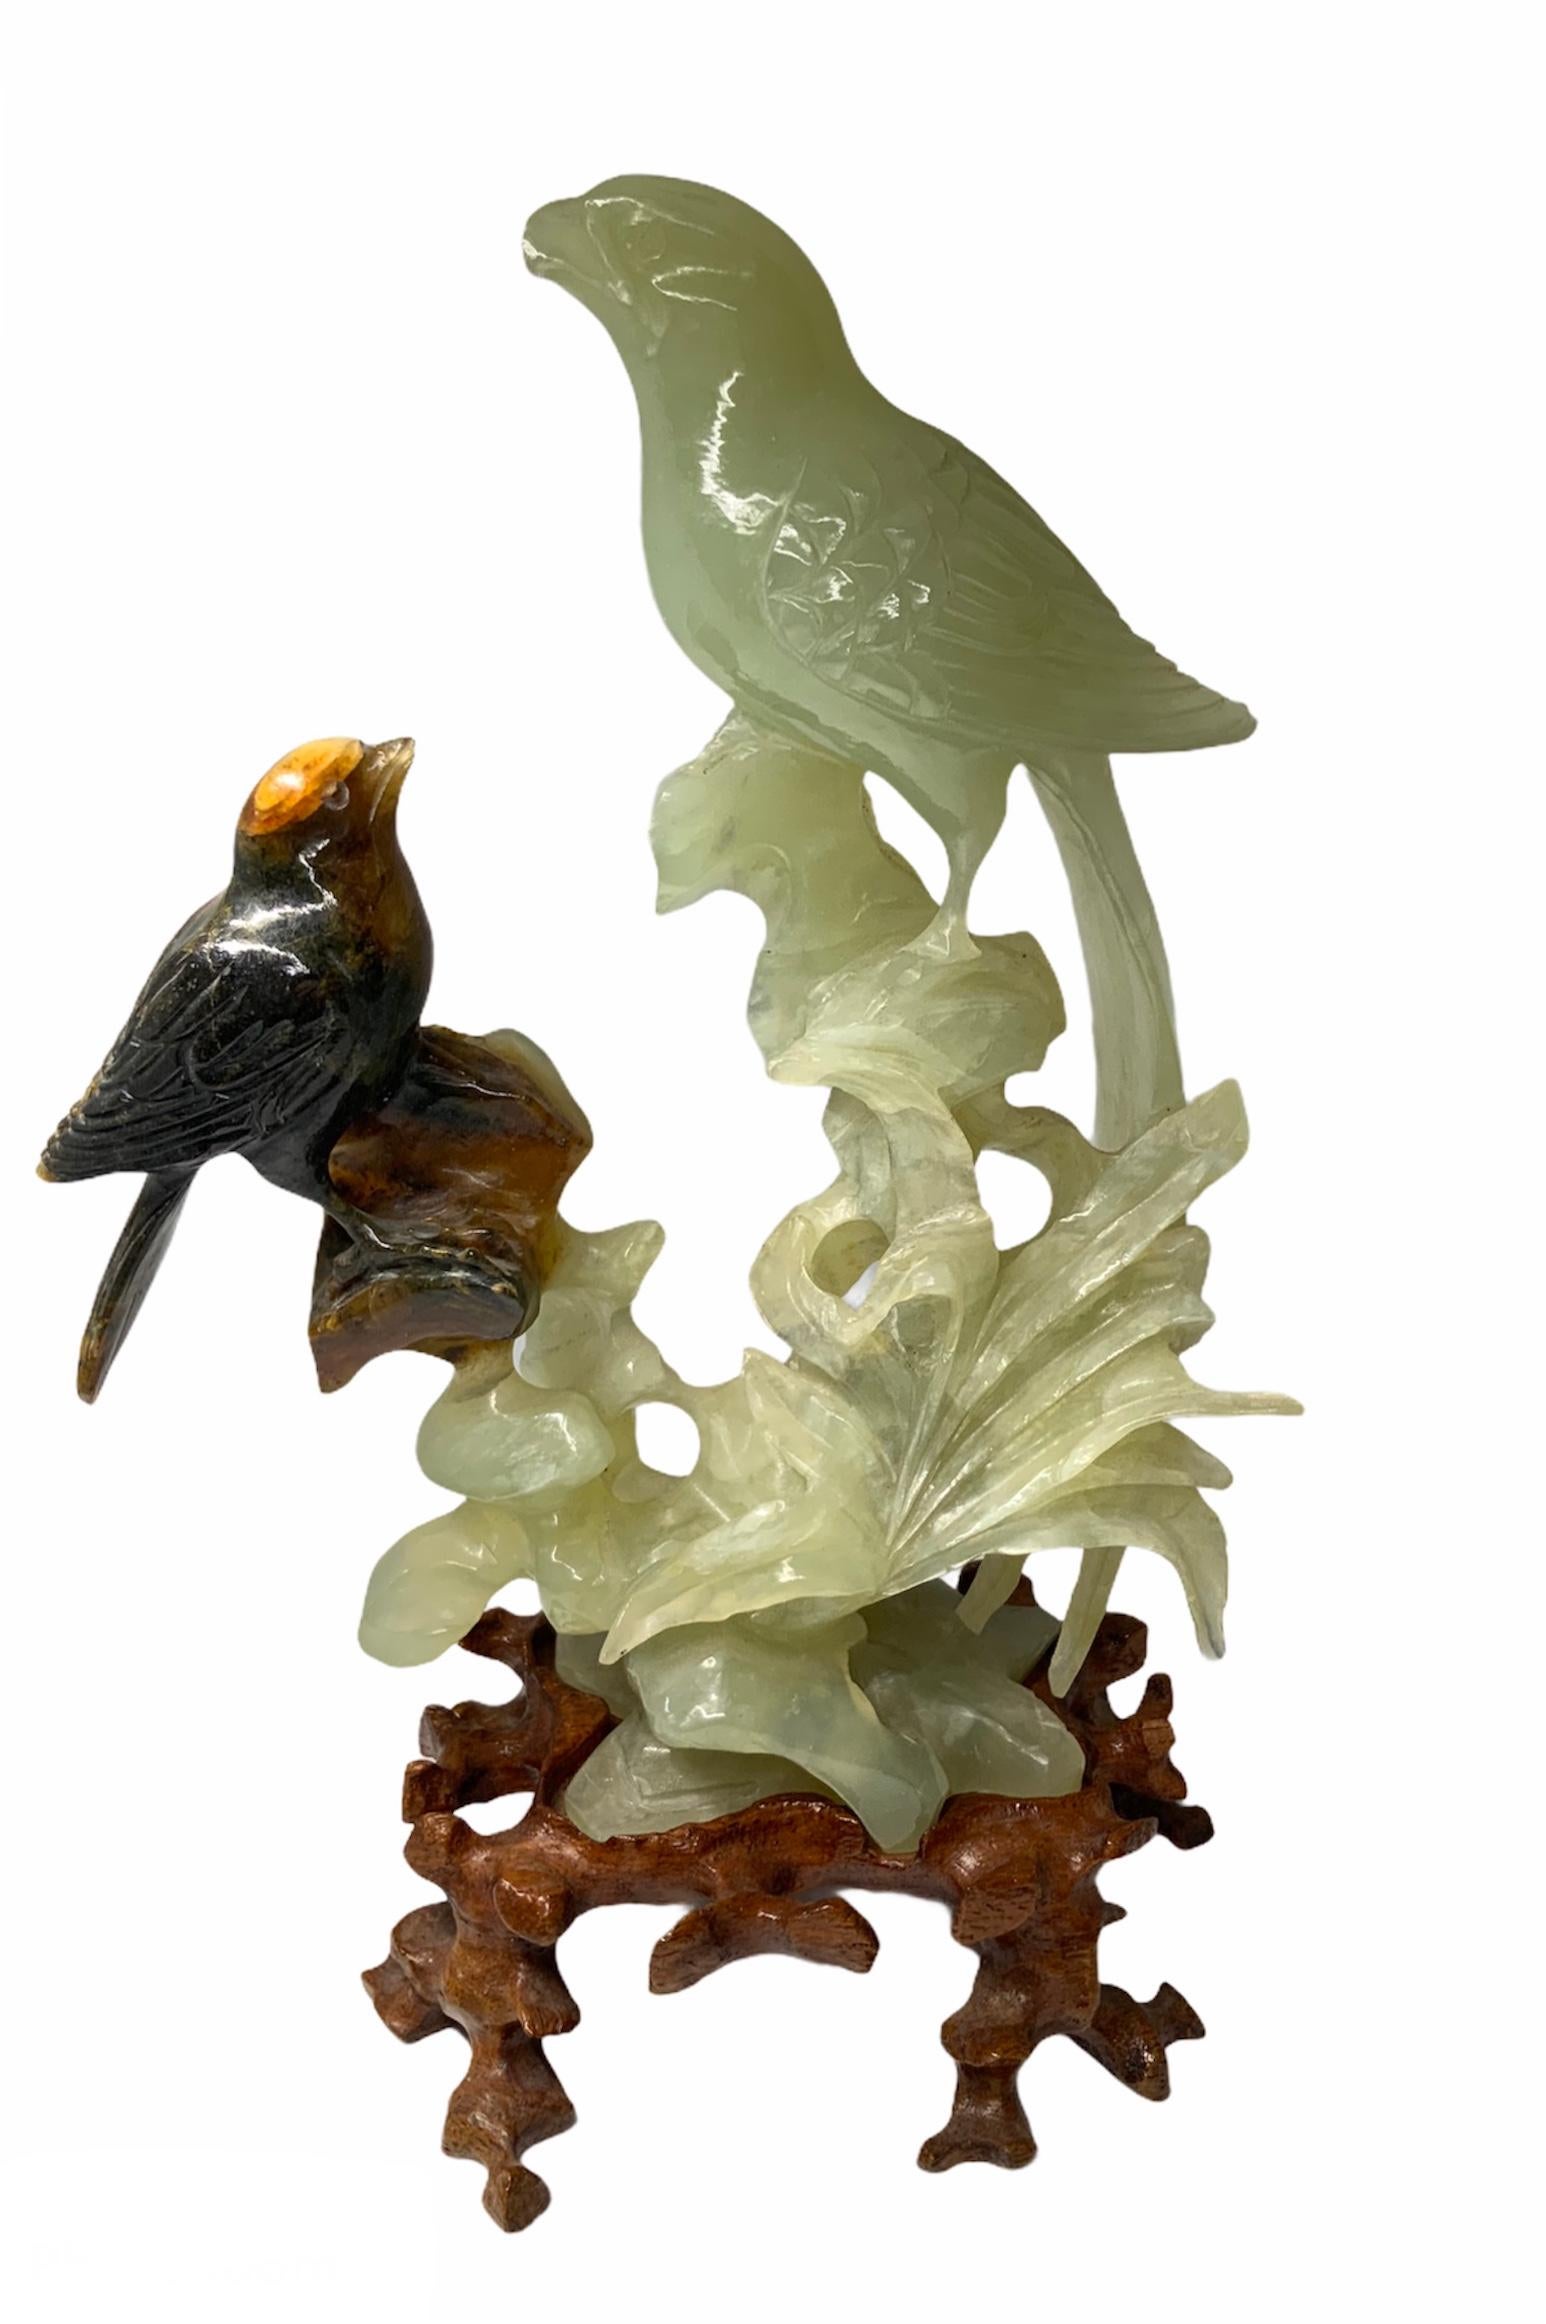 These are a pair of carved russet jade bird and jade parrot sculptures. They are standing up in some branches. The whole jade sculpture is standing over a carved wood base that appears like cut branches.